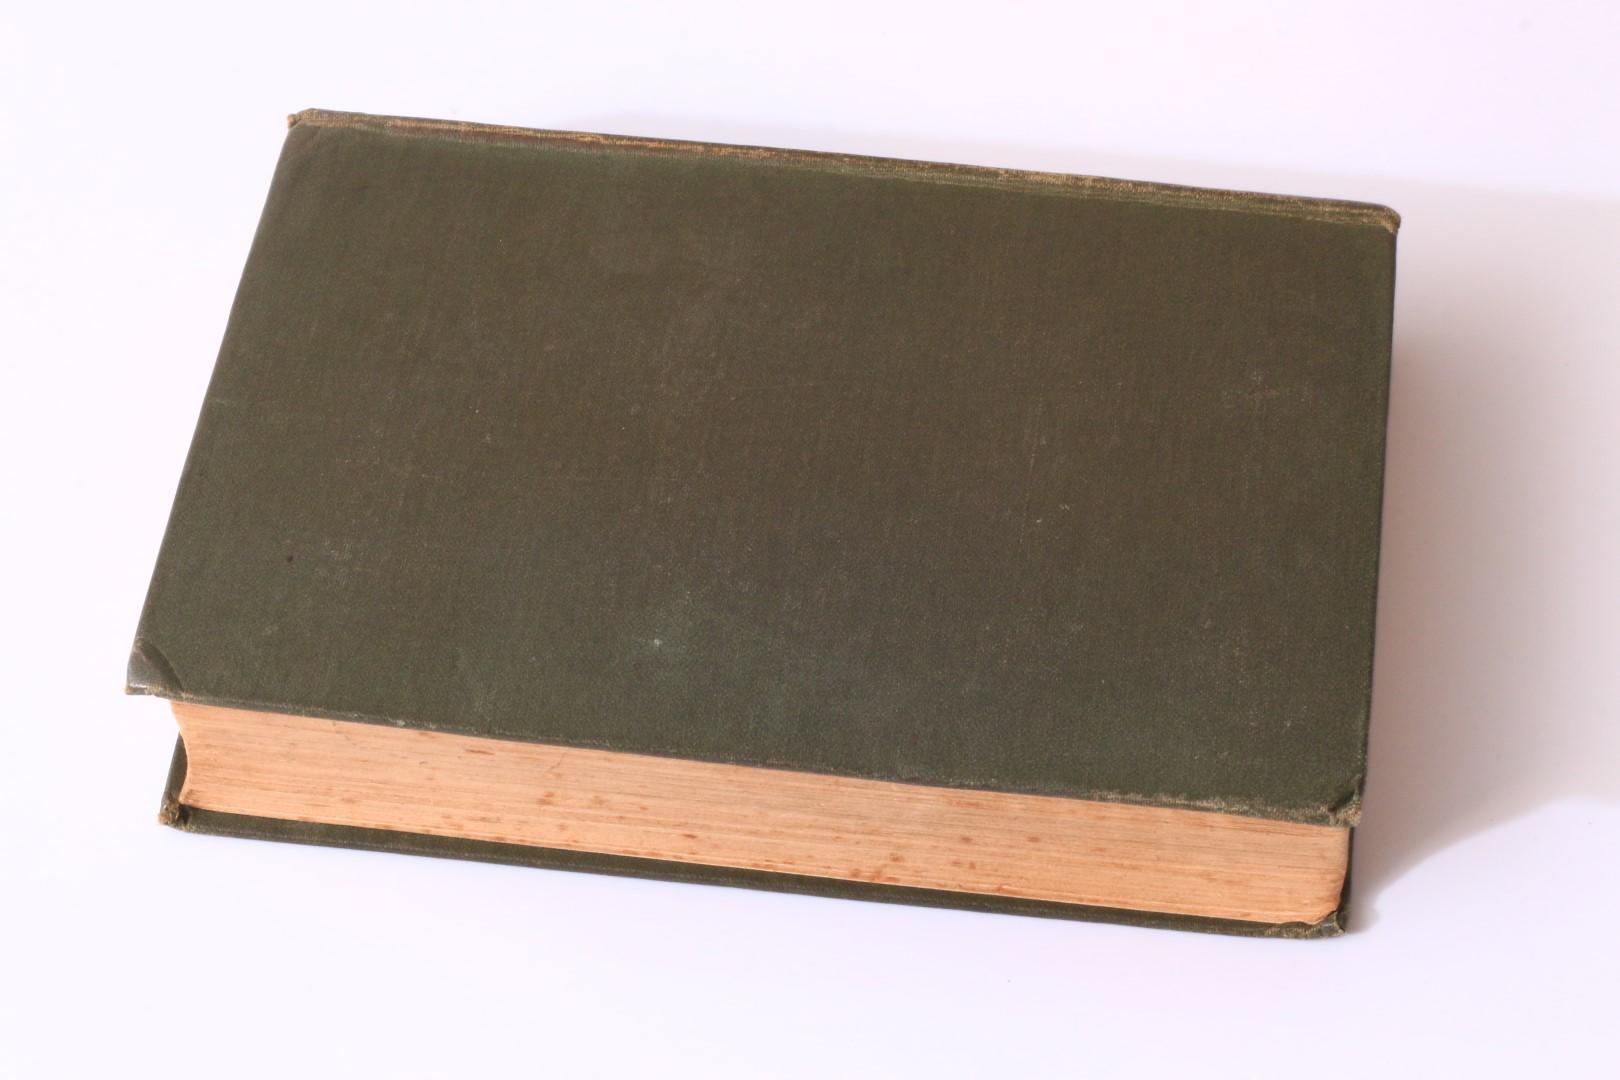 William Le Queux - Cinders' of Harley Street - Ward, Lock & Co., 1916, First Edition.